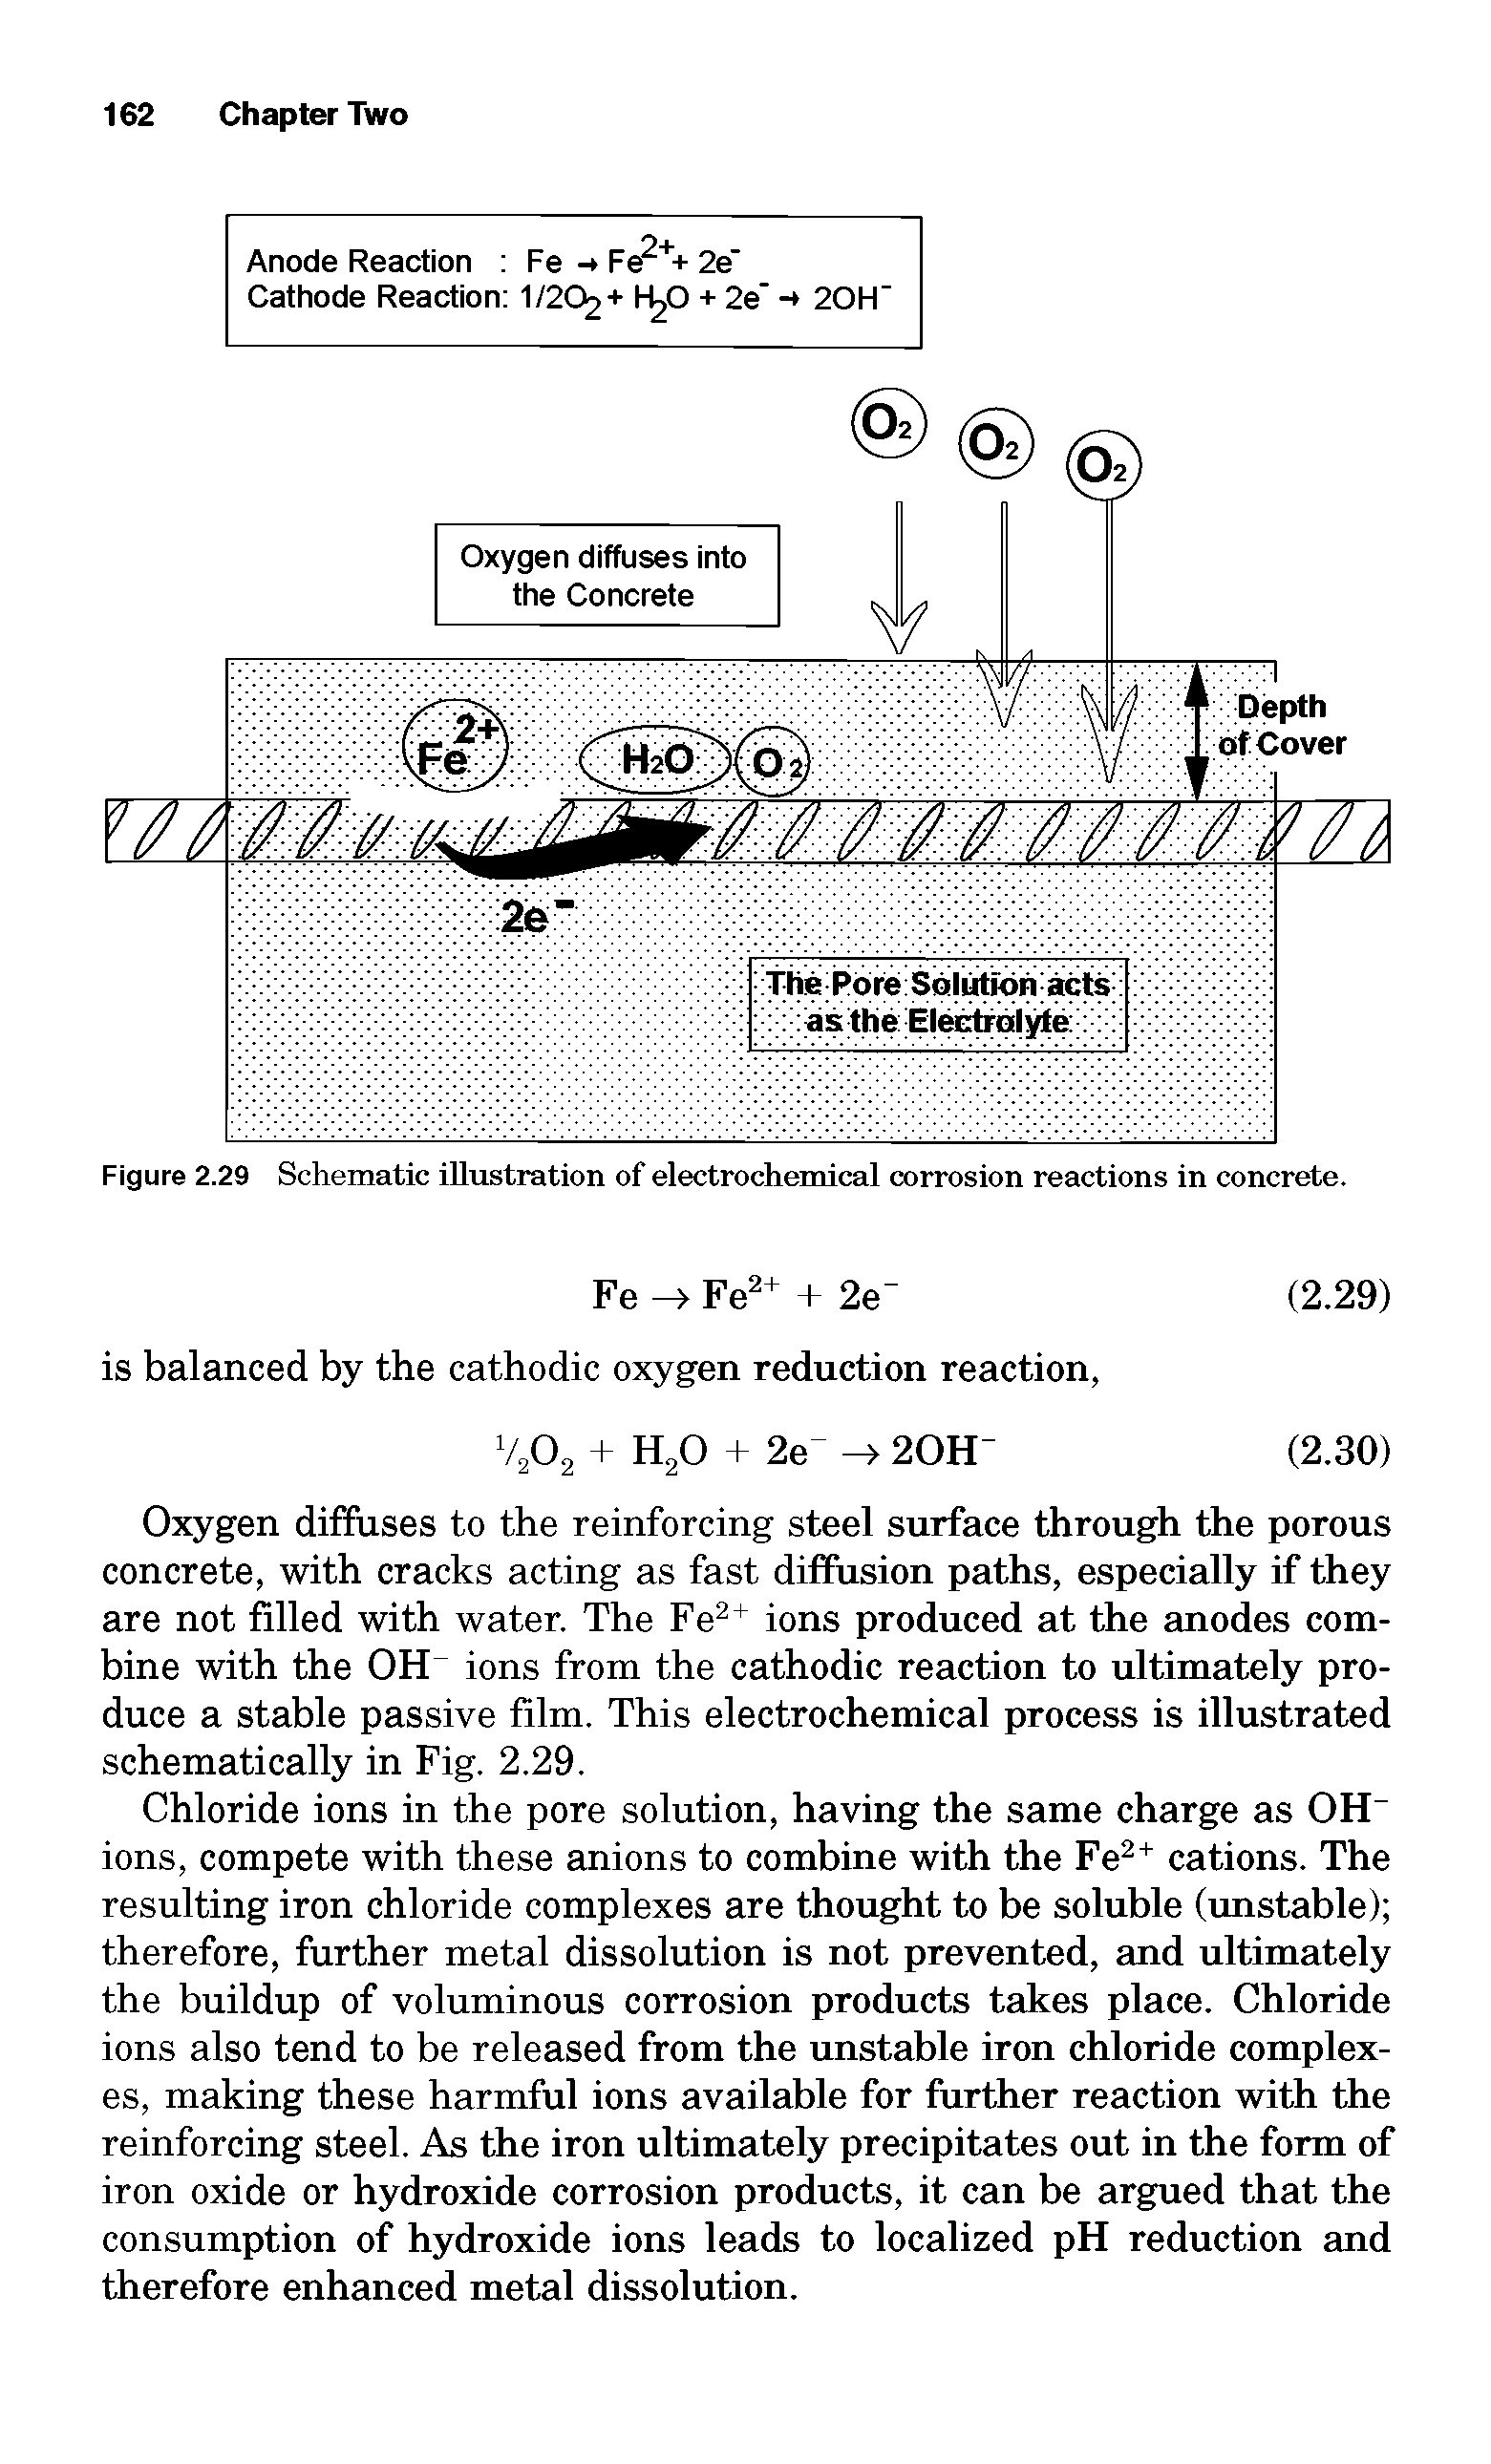 Figure 2.29 Schematic illustration of electrochemical corrosion reactions in concrete.